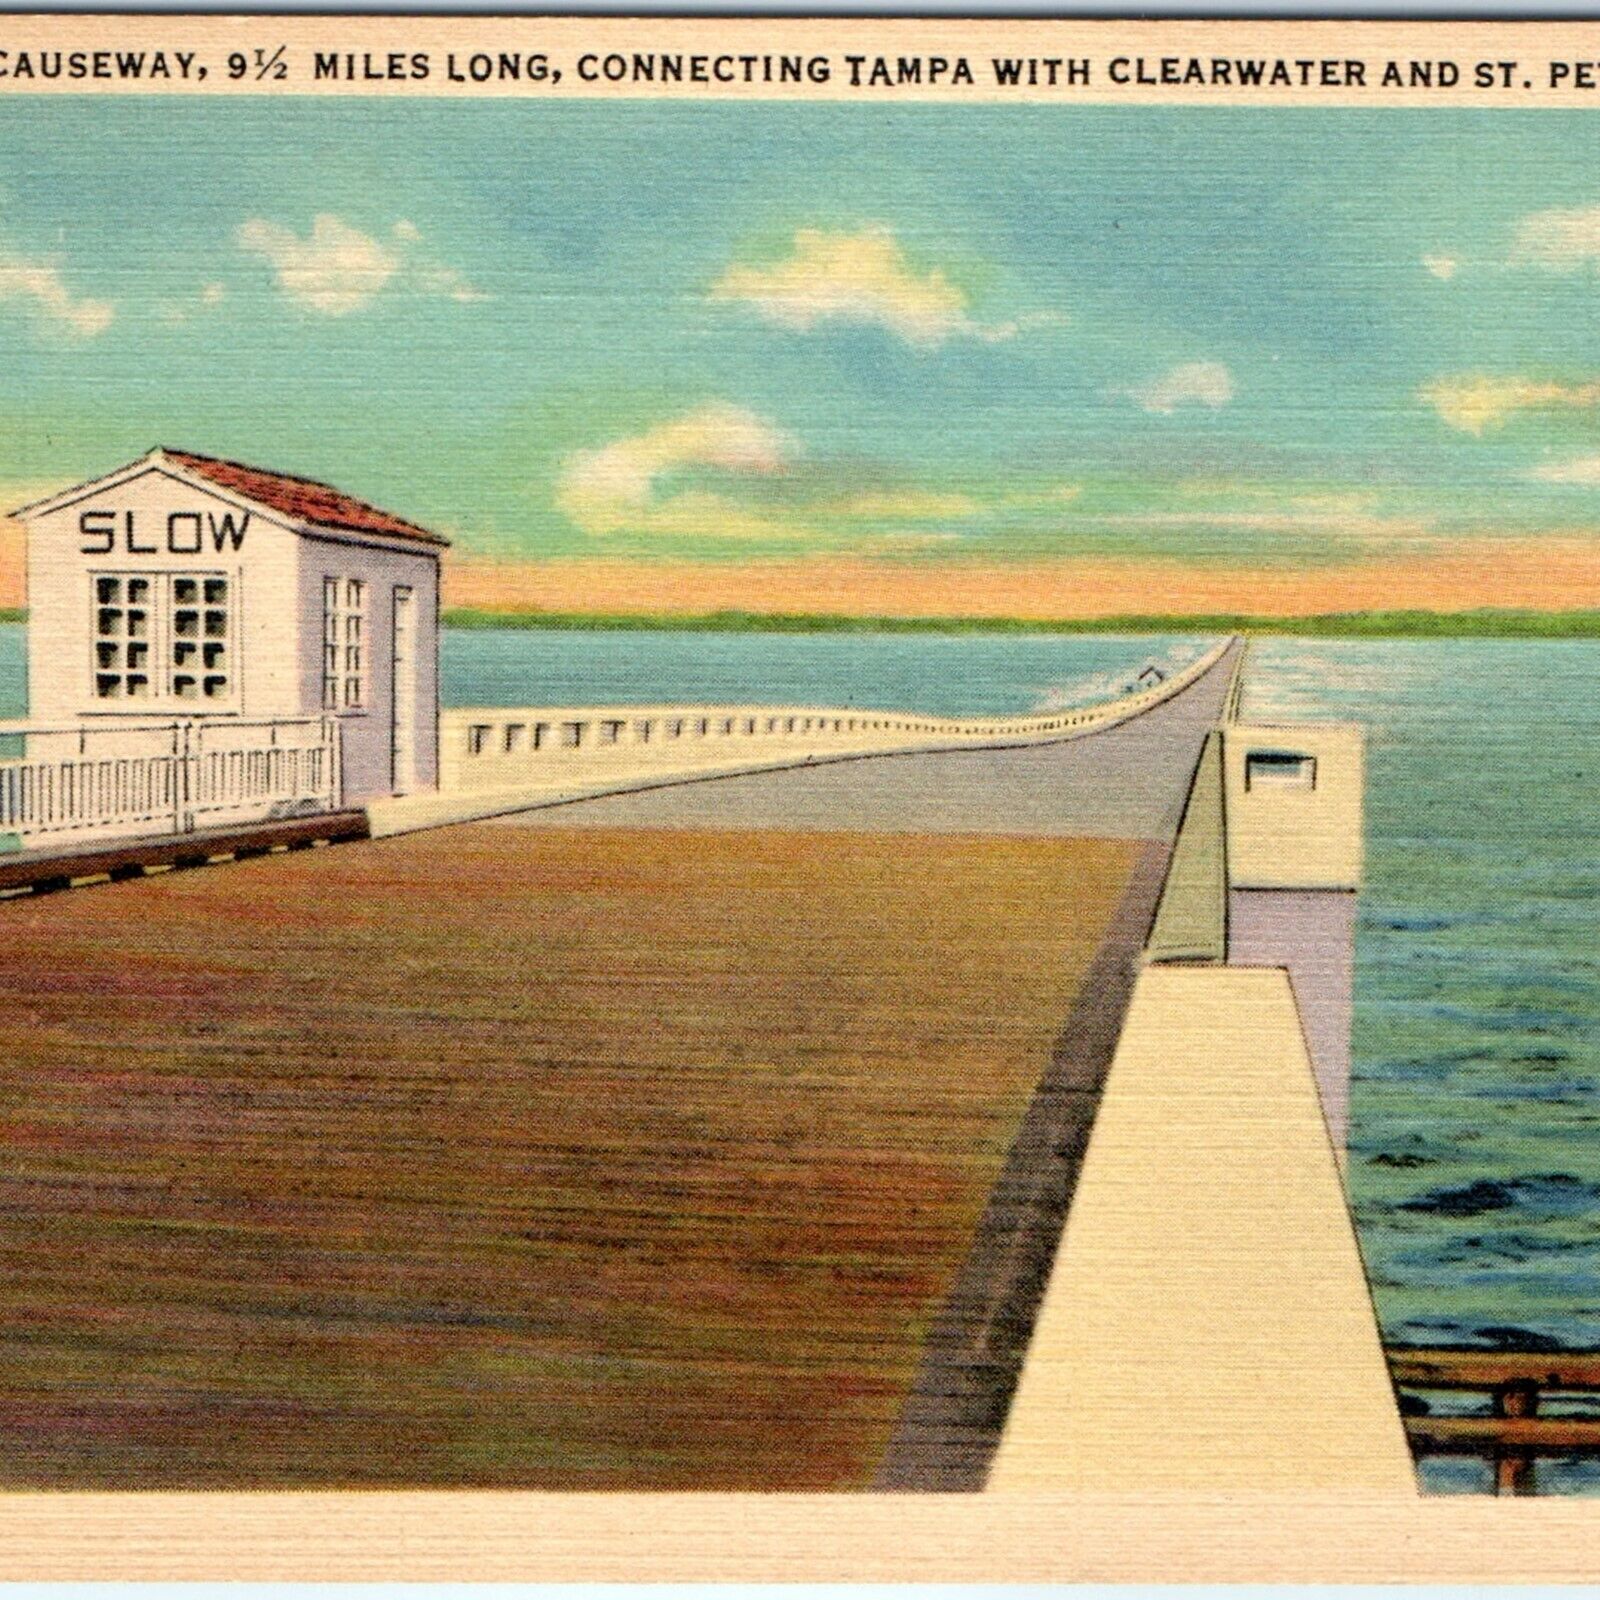 c1950s St Petersburg, Fla Davis Causeway Postcard Tampa with Clearwater A41